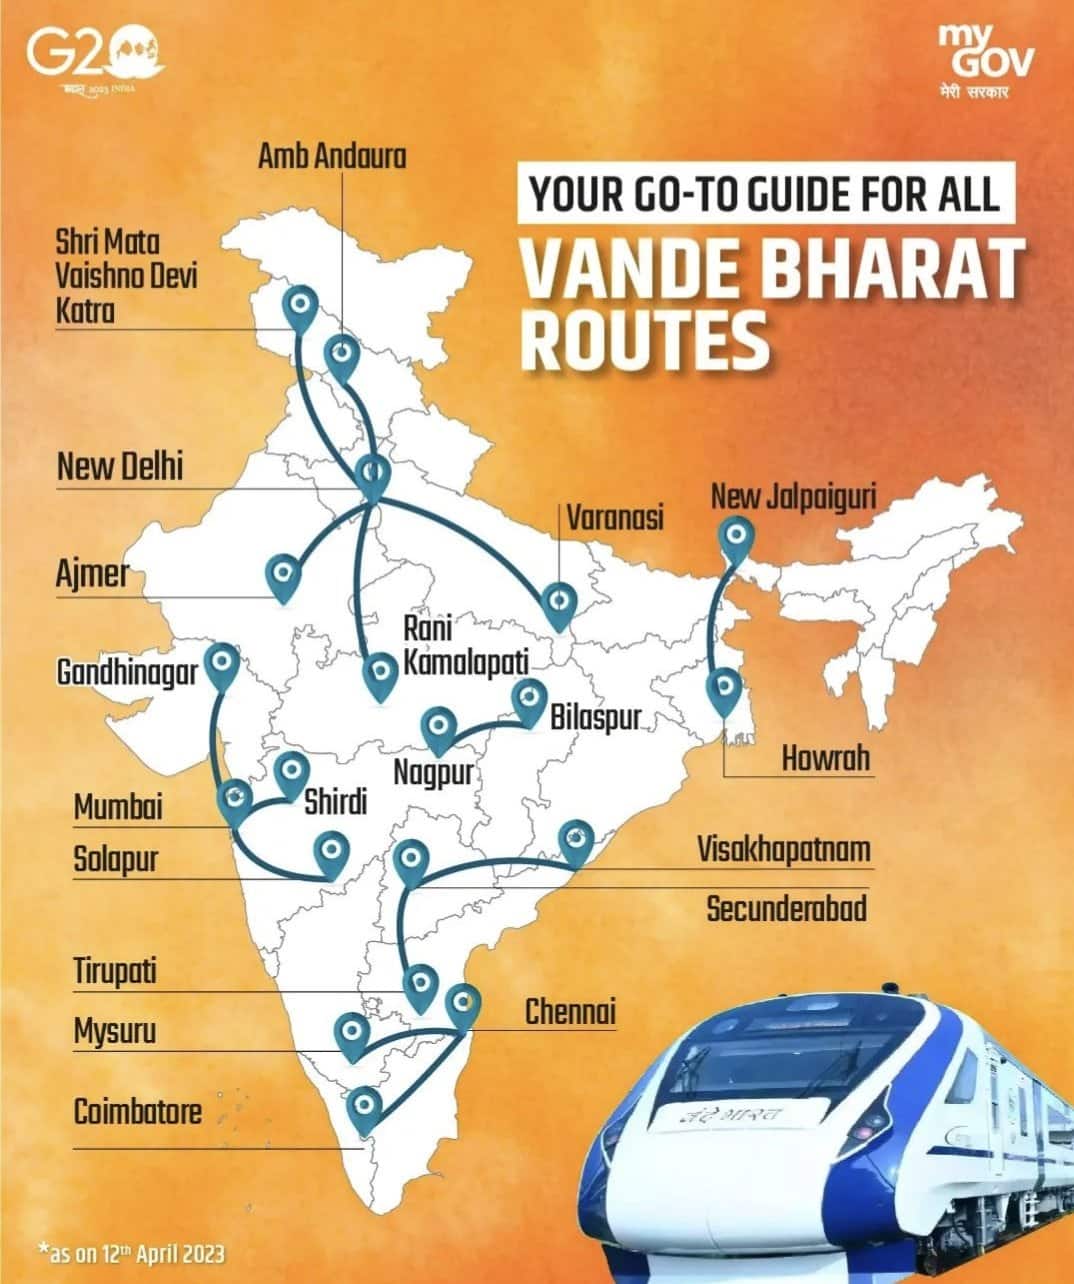 Vande Bharat Express Now Operational On 14 Routes, Delhi Gets Most ...